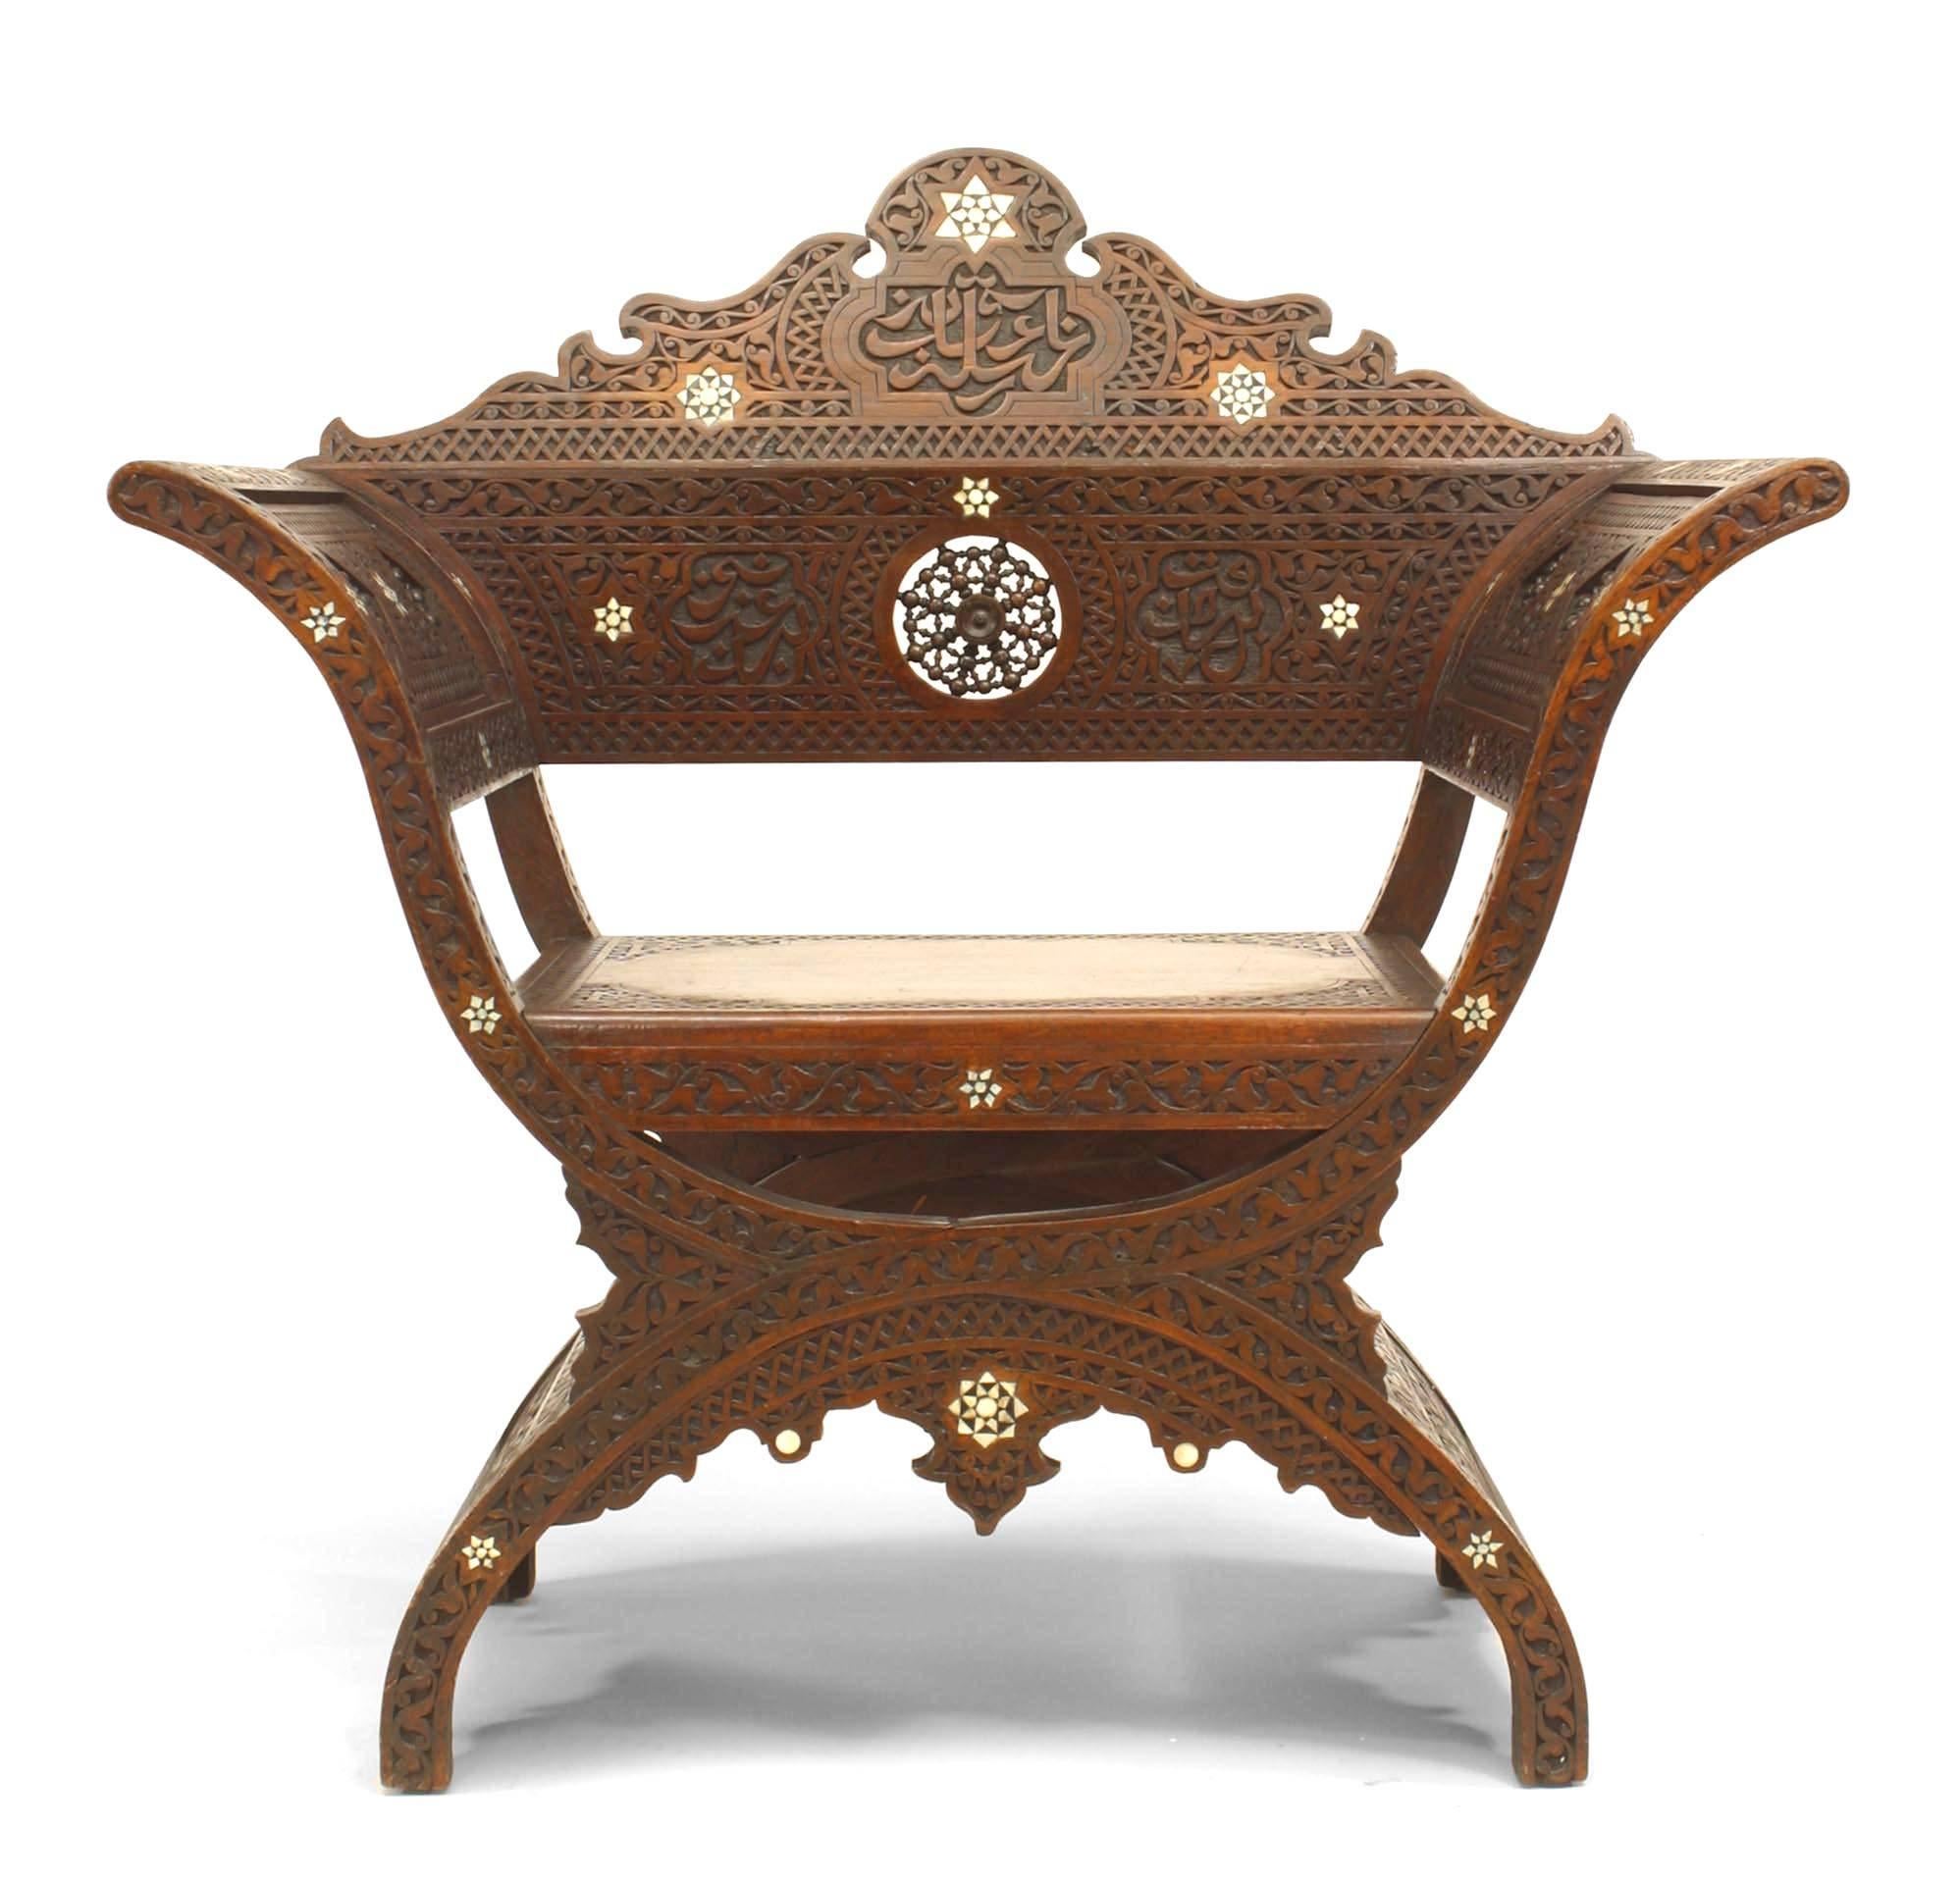 Middle Eastern Moorish (19th Century) carved walnut Savonarola style armchair with a spindle and ball round back panel.
